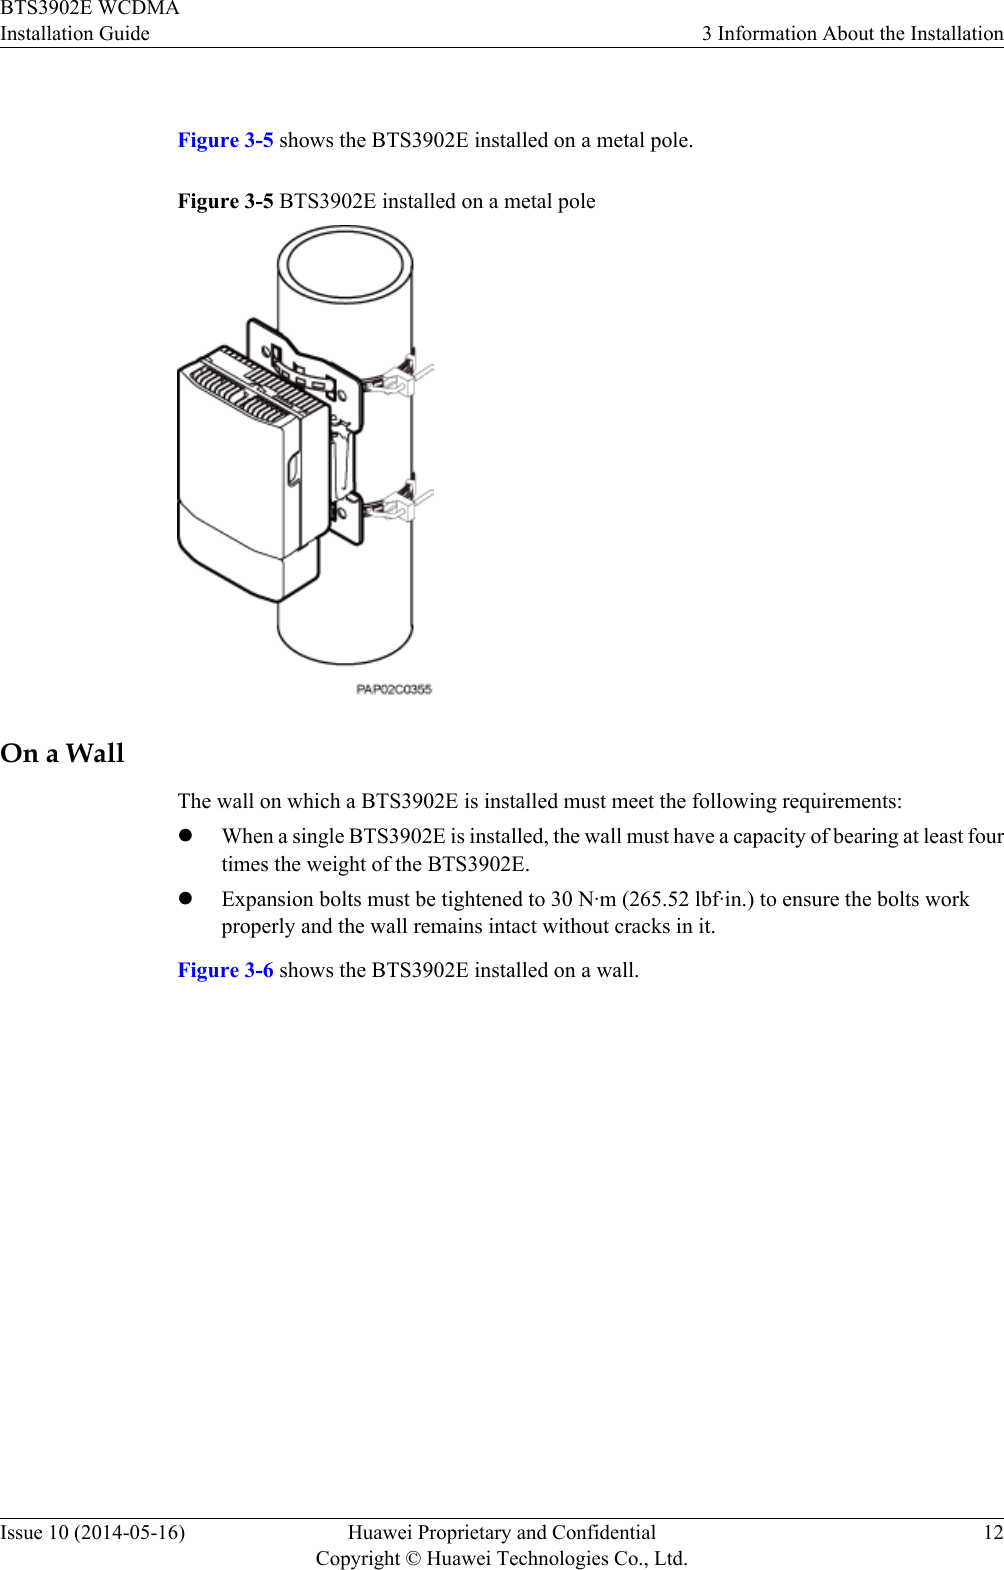  Figure 3-5 shows the BTS3902E installed on a metal pole.Figure 3-5 BTS3902E installed on a metal poleOn a WallThe wall on which a BTS3902E is installed must meet the following requirements:lWhen a single BTS3902E is installed, the wall must have a capacity of bearing at least fourtimes the weight of the BTS3902E.lExpansion bolts must be tightened to 30 N·m (265.52 lbf·in.) to ensure the bolts workproperly and the wall remains intact without cracks in it.Figure 3-6 shows the BTS3902E installed on a wall.BTS3902E WCDMAInstallation Guide 3 Information About the InstallationIssue 10 (2014-05-16) Huawei Proprietary and ConfidentialCopyright © Huawei Technologies Co., Ltd.12